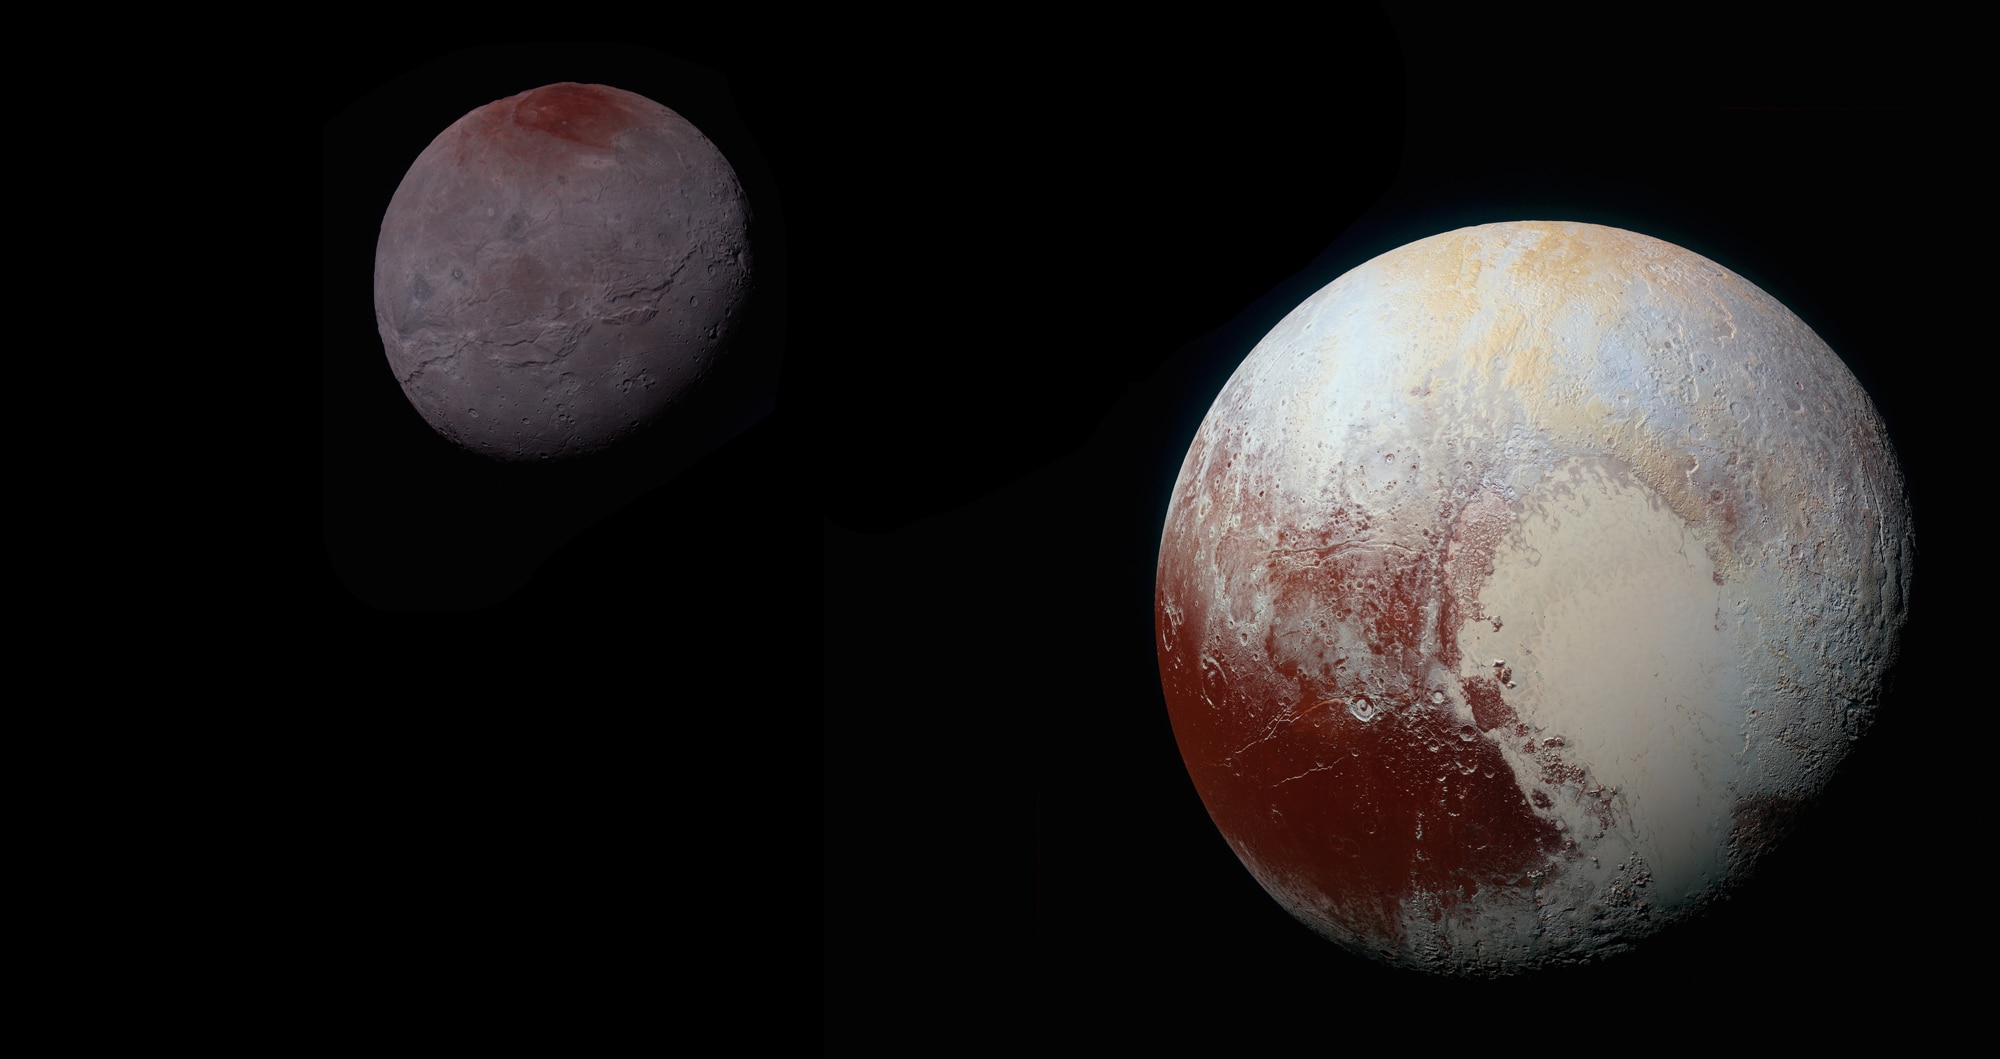 Pluto and Charon, to scale in size and brightness. Credit: NASA/Johns Hopkins University Applied Physics Laboratory/Southwest Research Institute